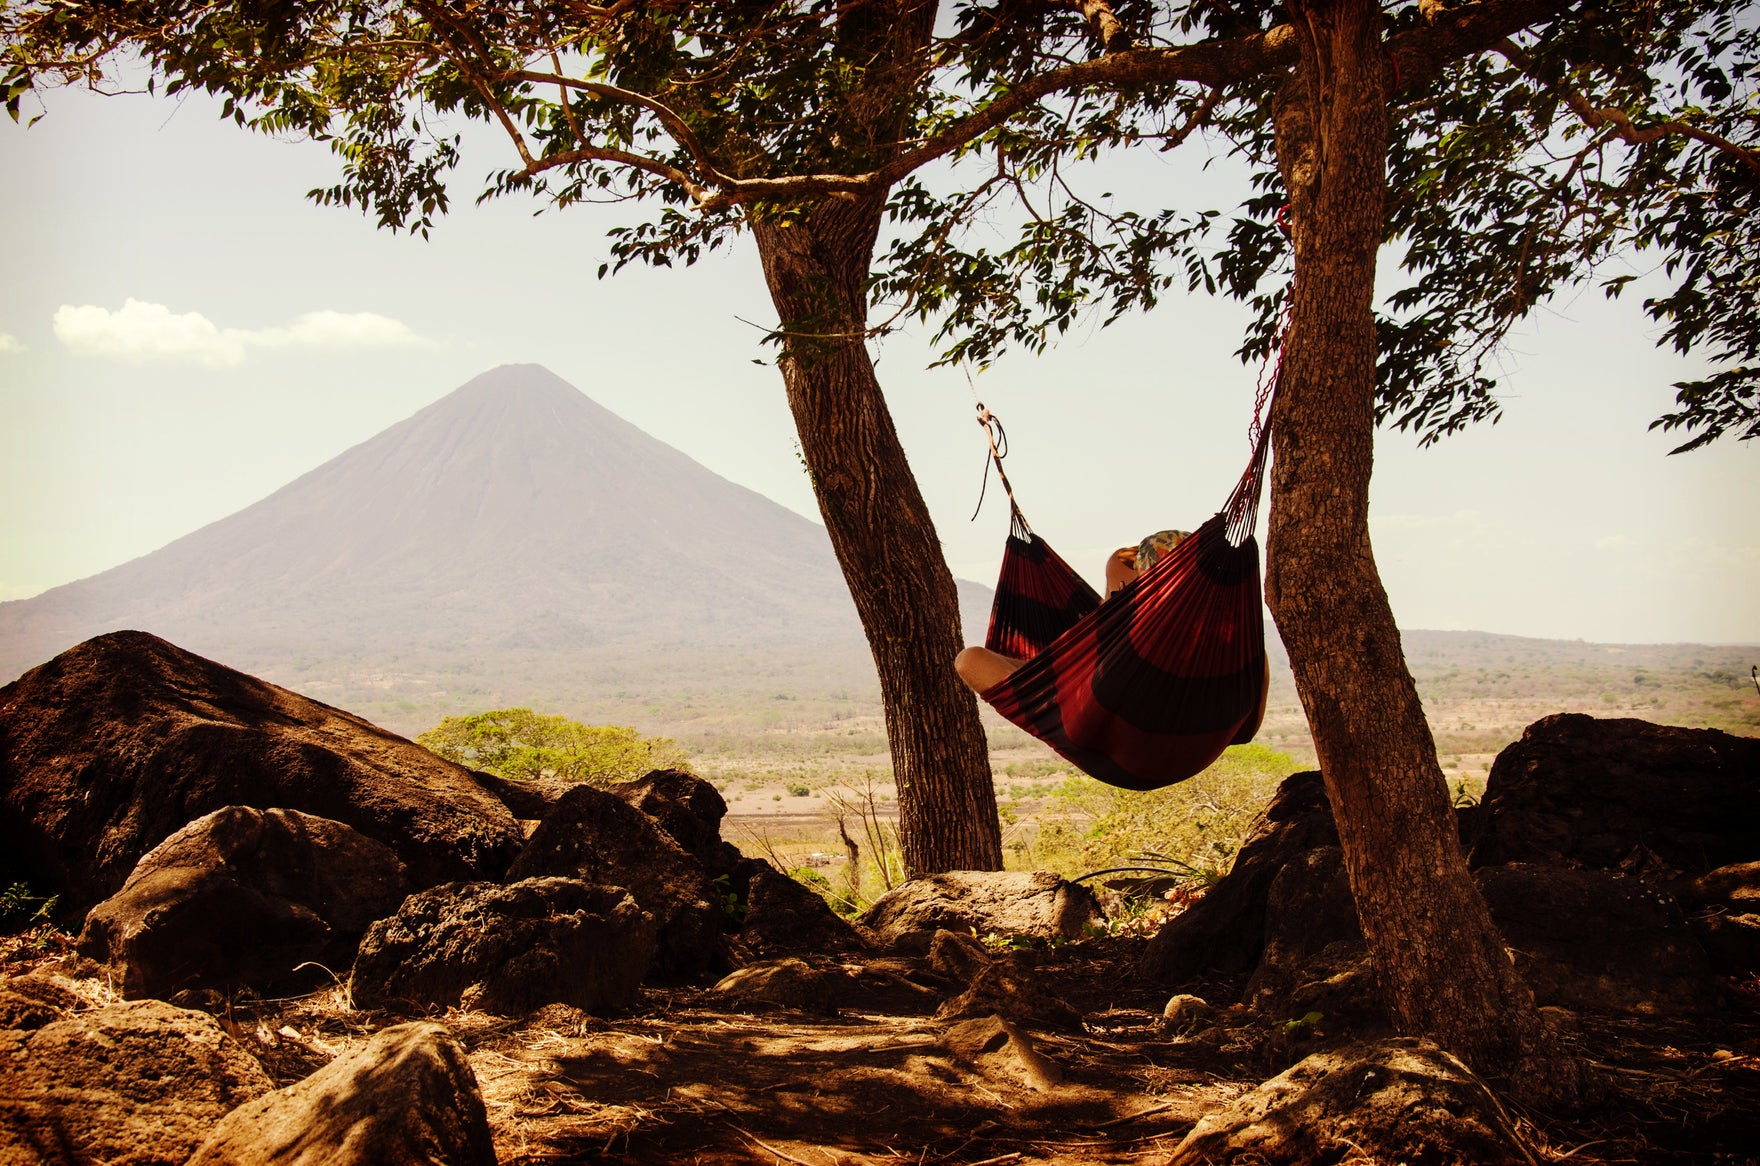 A person relaxes in a hammock between two trees in front of a desert mountain.